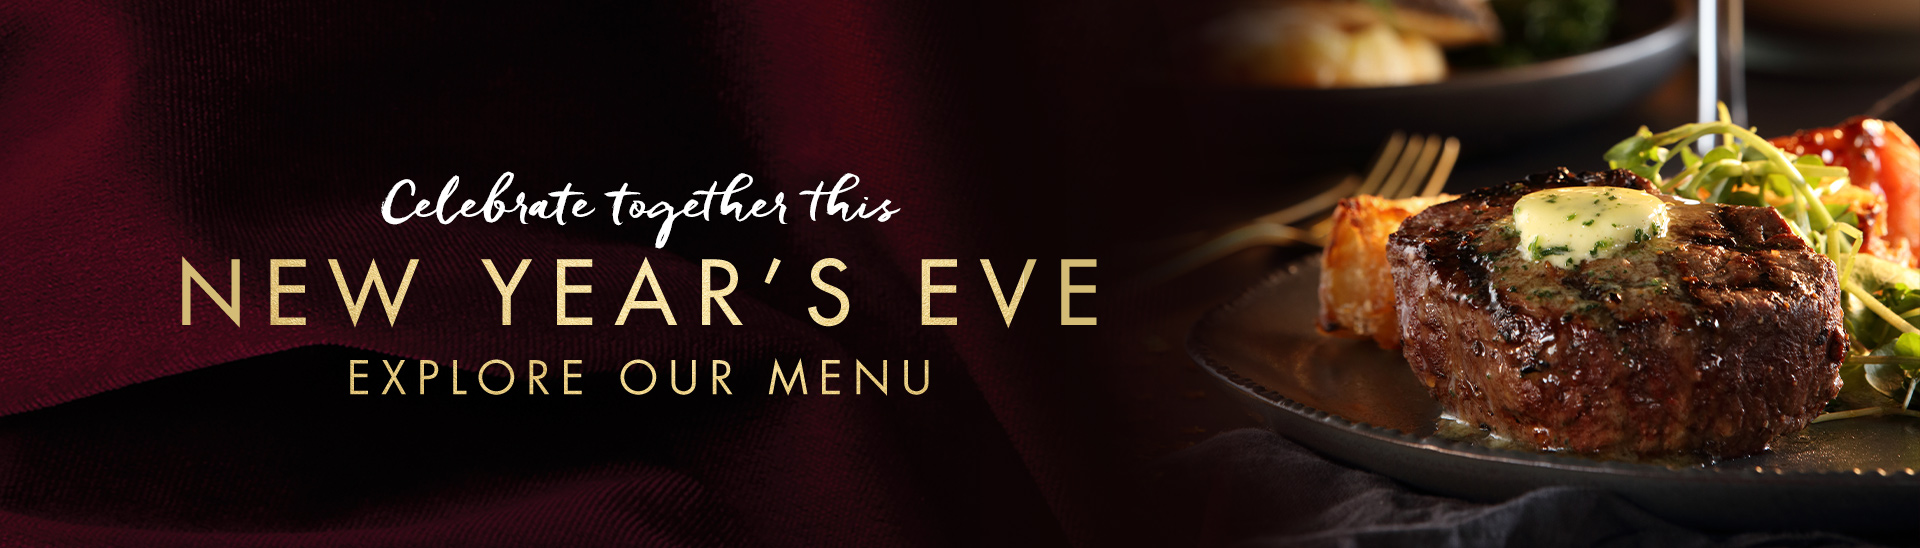 New Year’s eve menu at Miller & Carter Colchester 